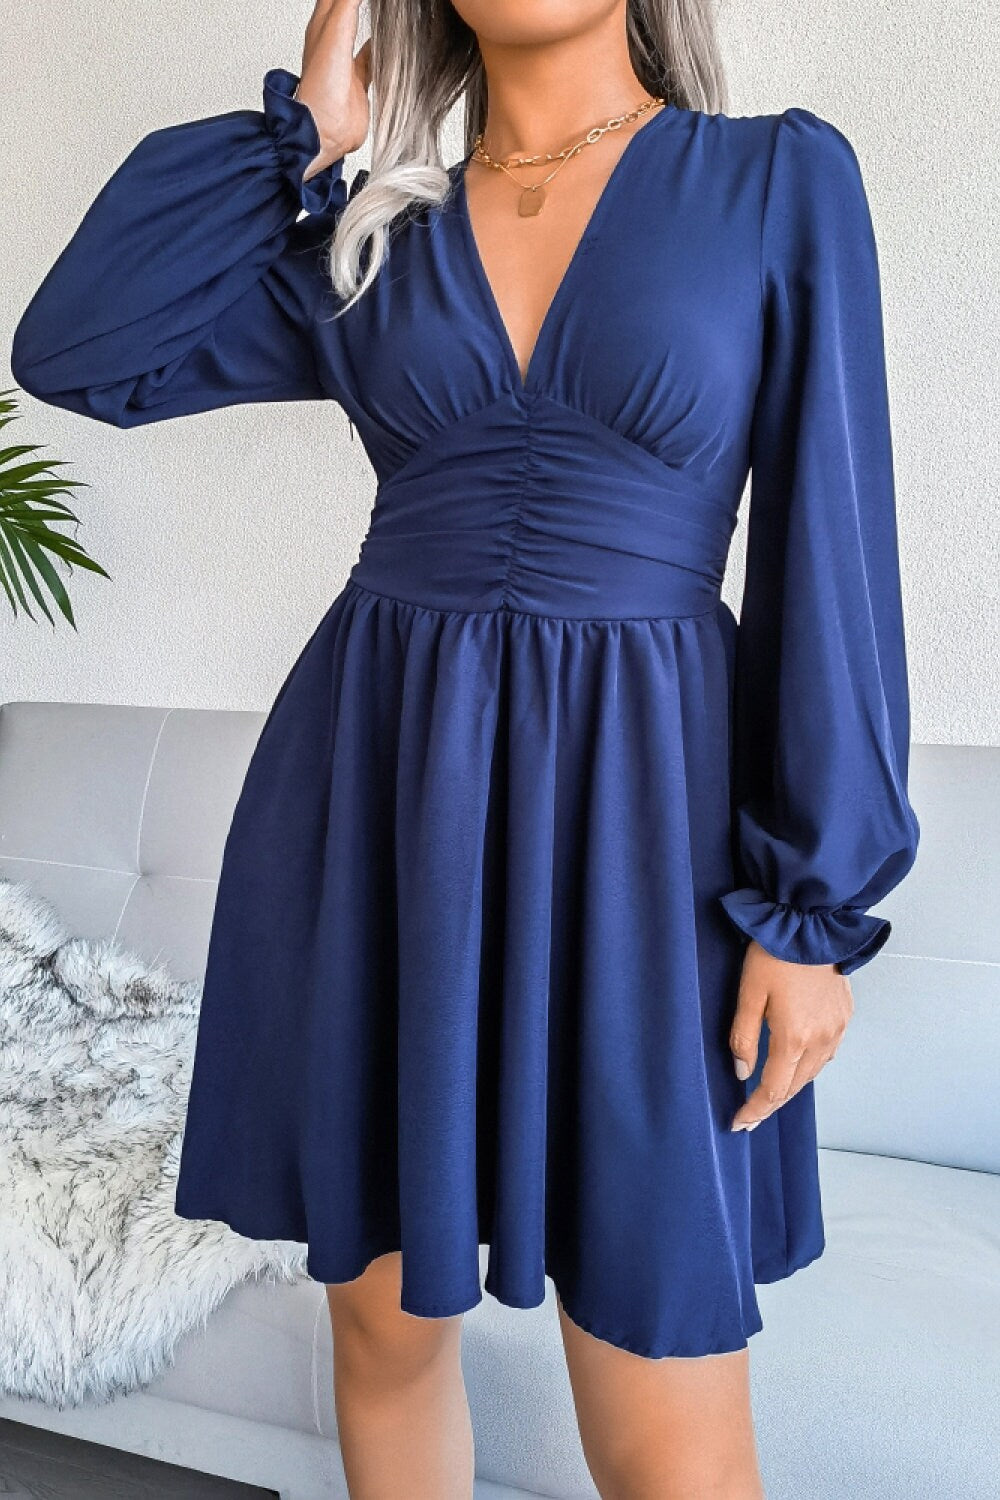 Dark Blue Ruched Mini Dress with Deep V Neck / Cocktail Party Dresses | Dresses for Women